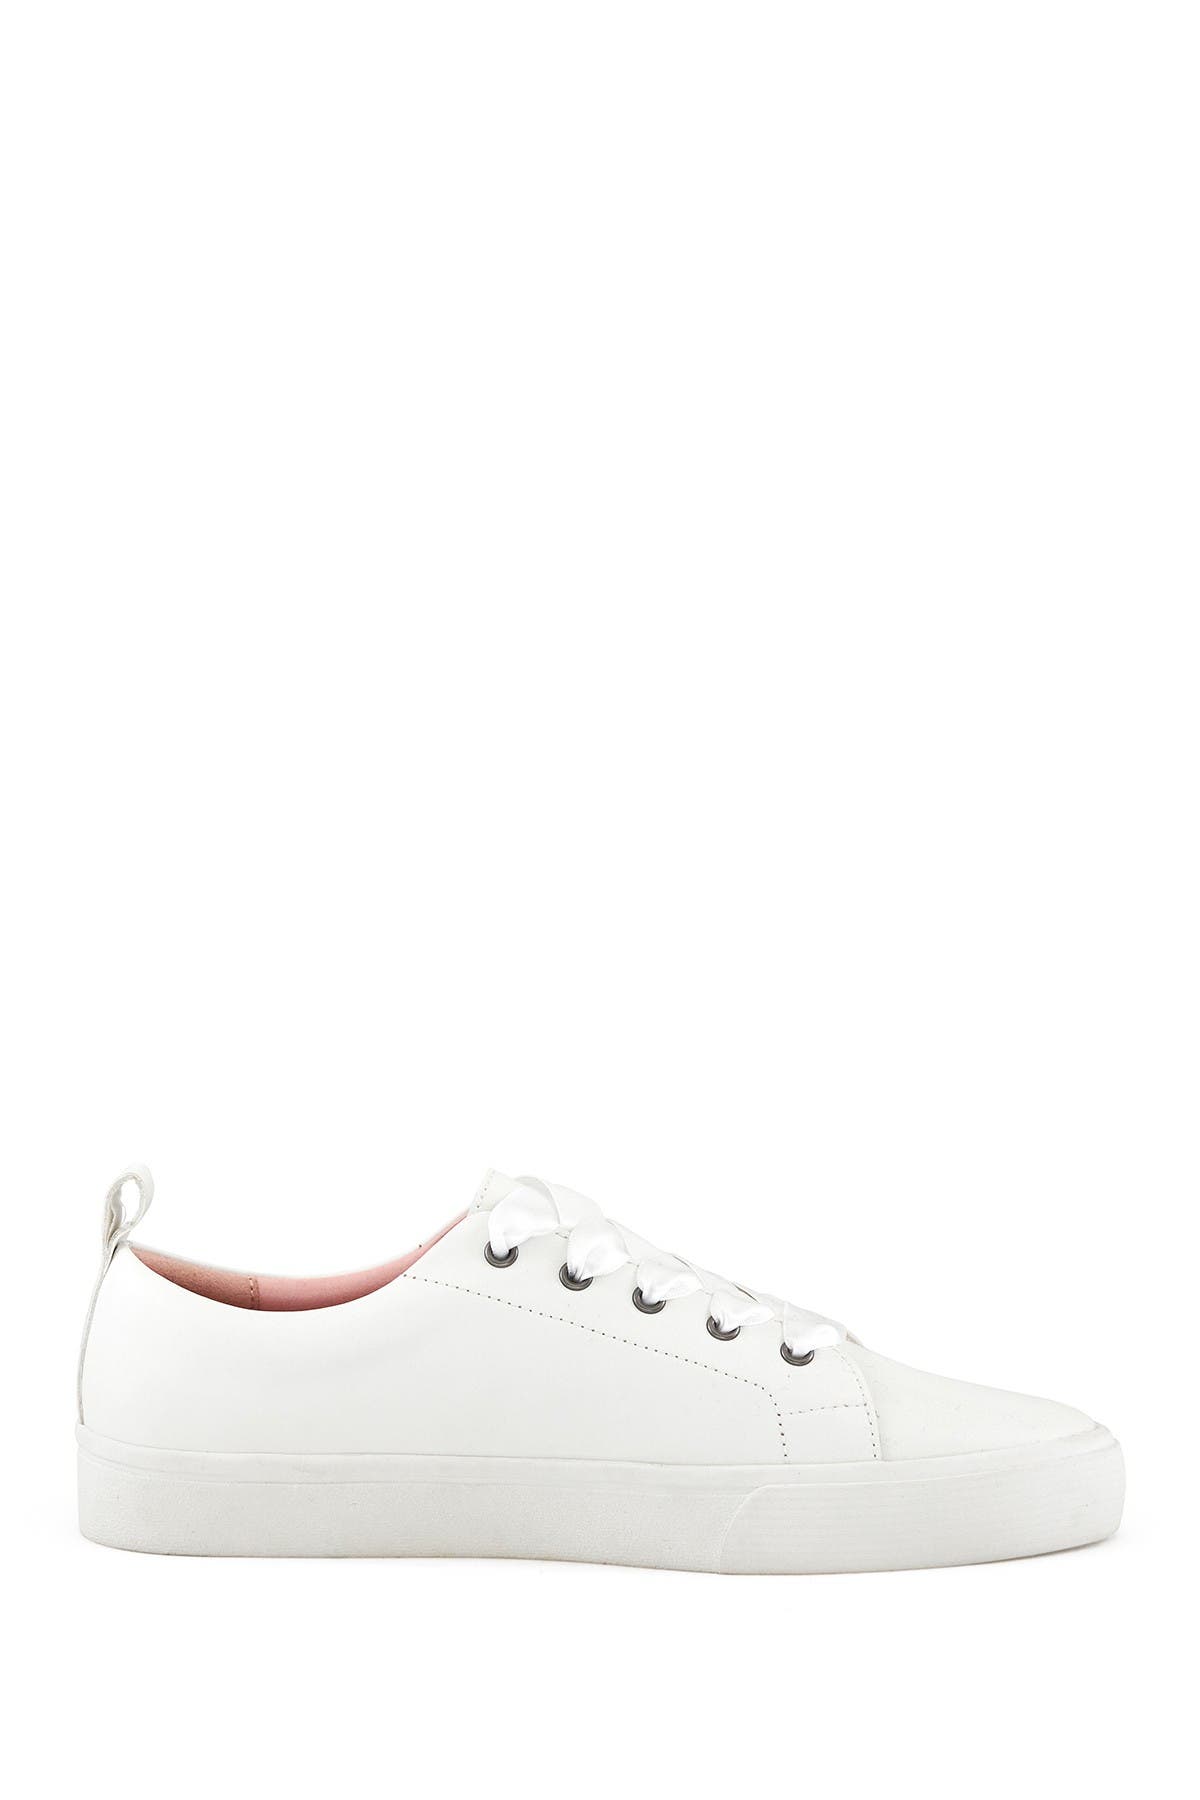 Nest Footwear Vancouver Classic Sneaker In White